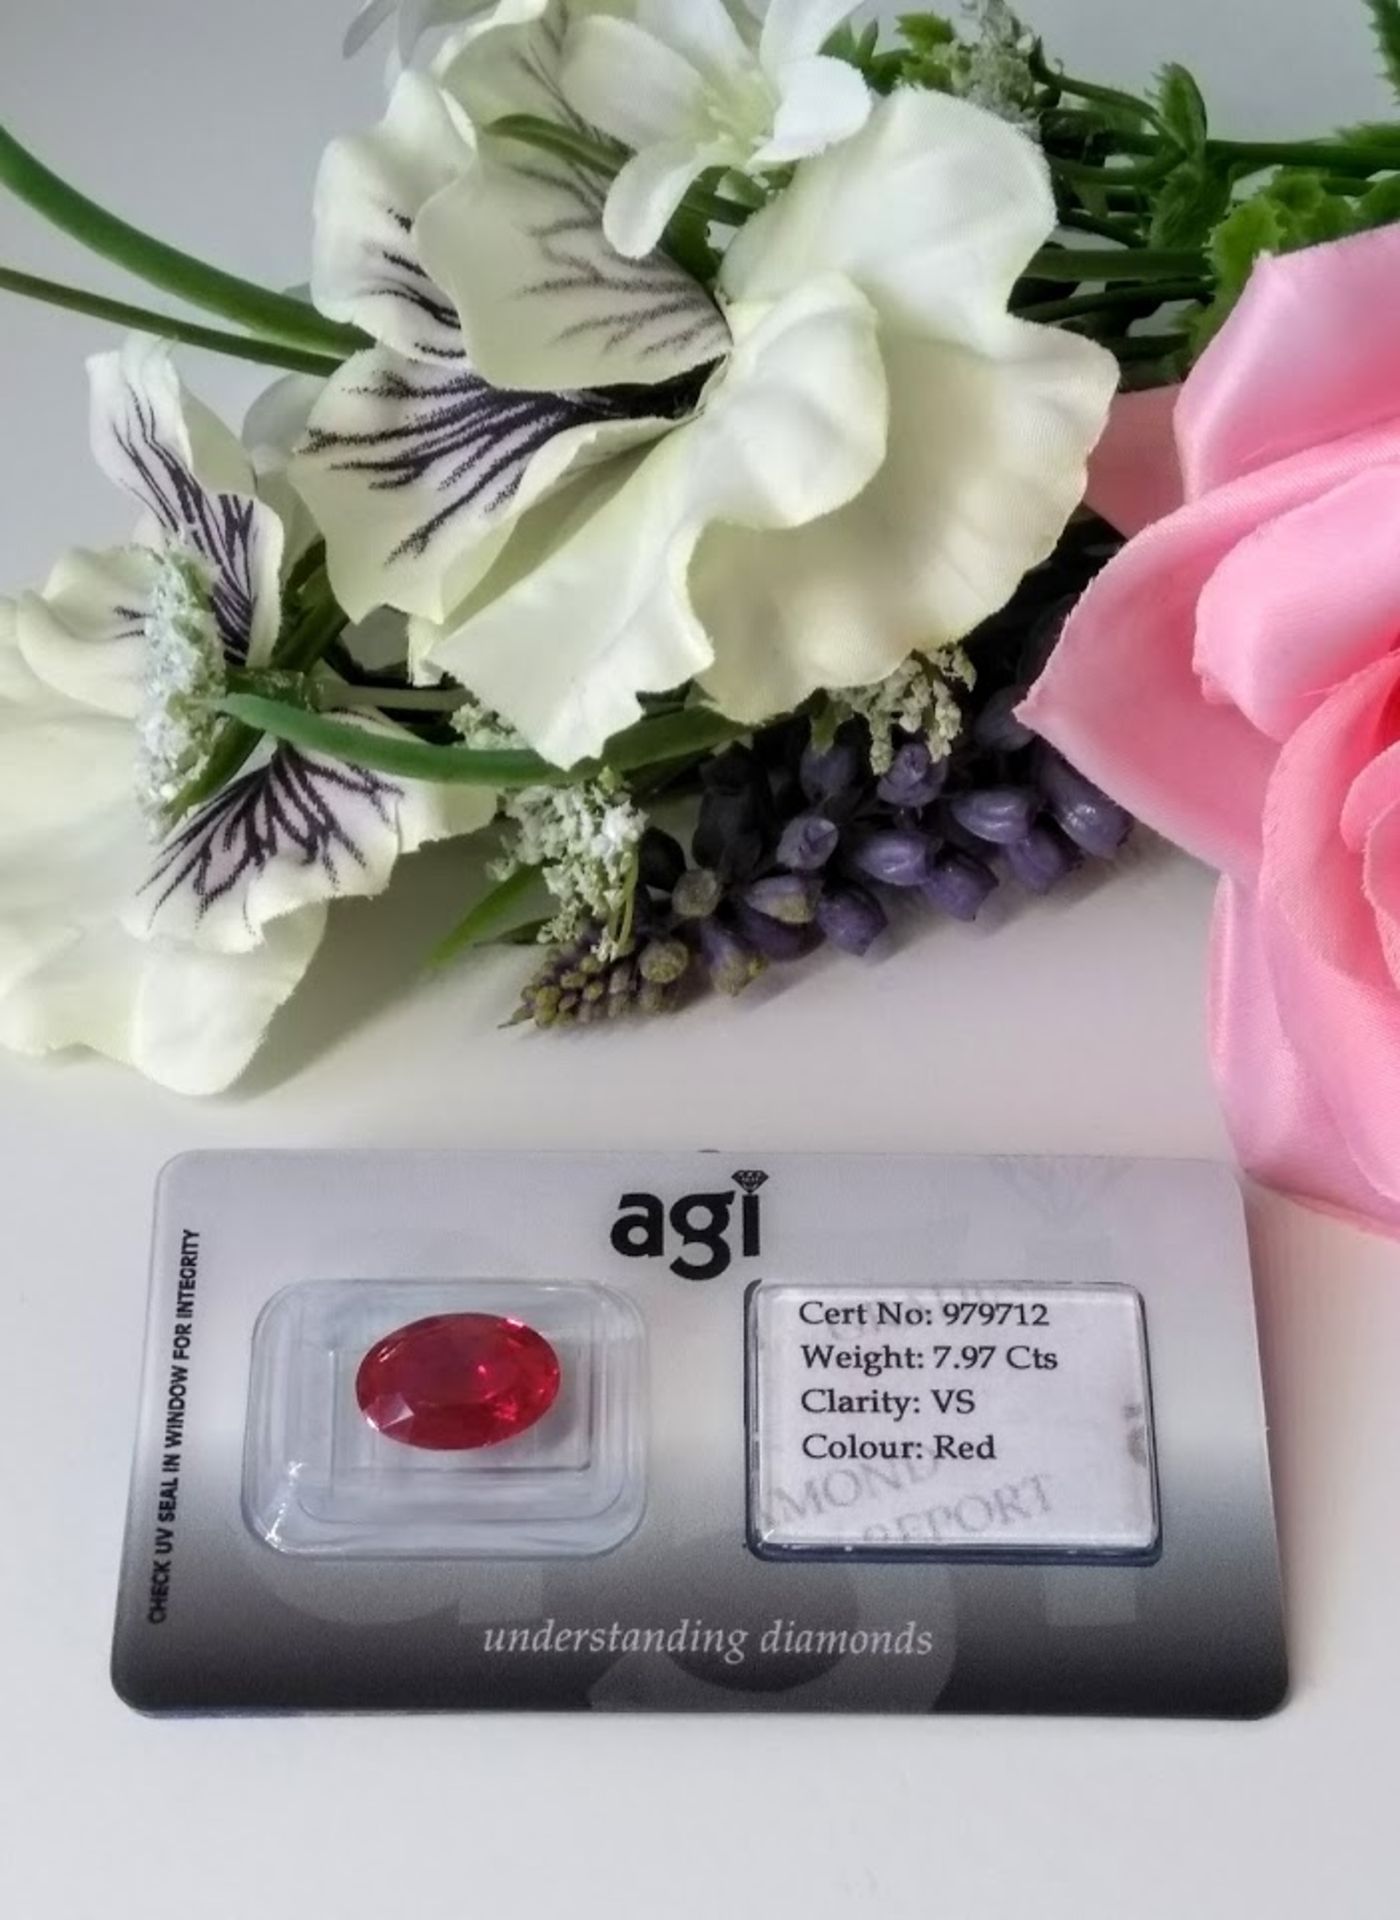 VS Clarity. A Truly Stunning AGI Certified £19,925.00 7.97 Cts Ruby Investment Gemstone - VS Clarity